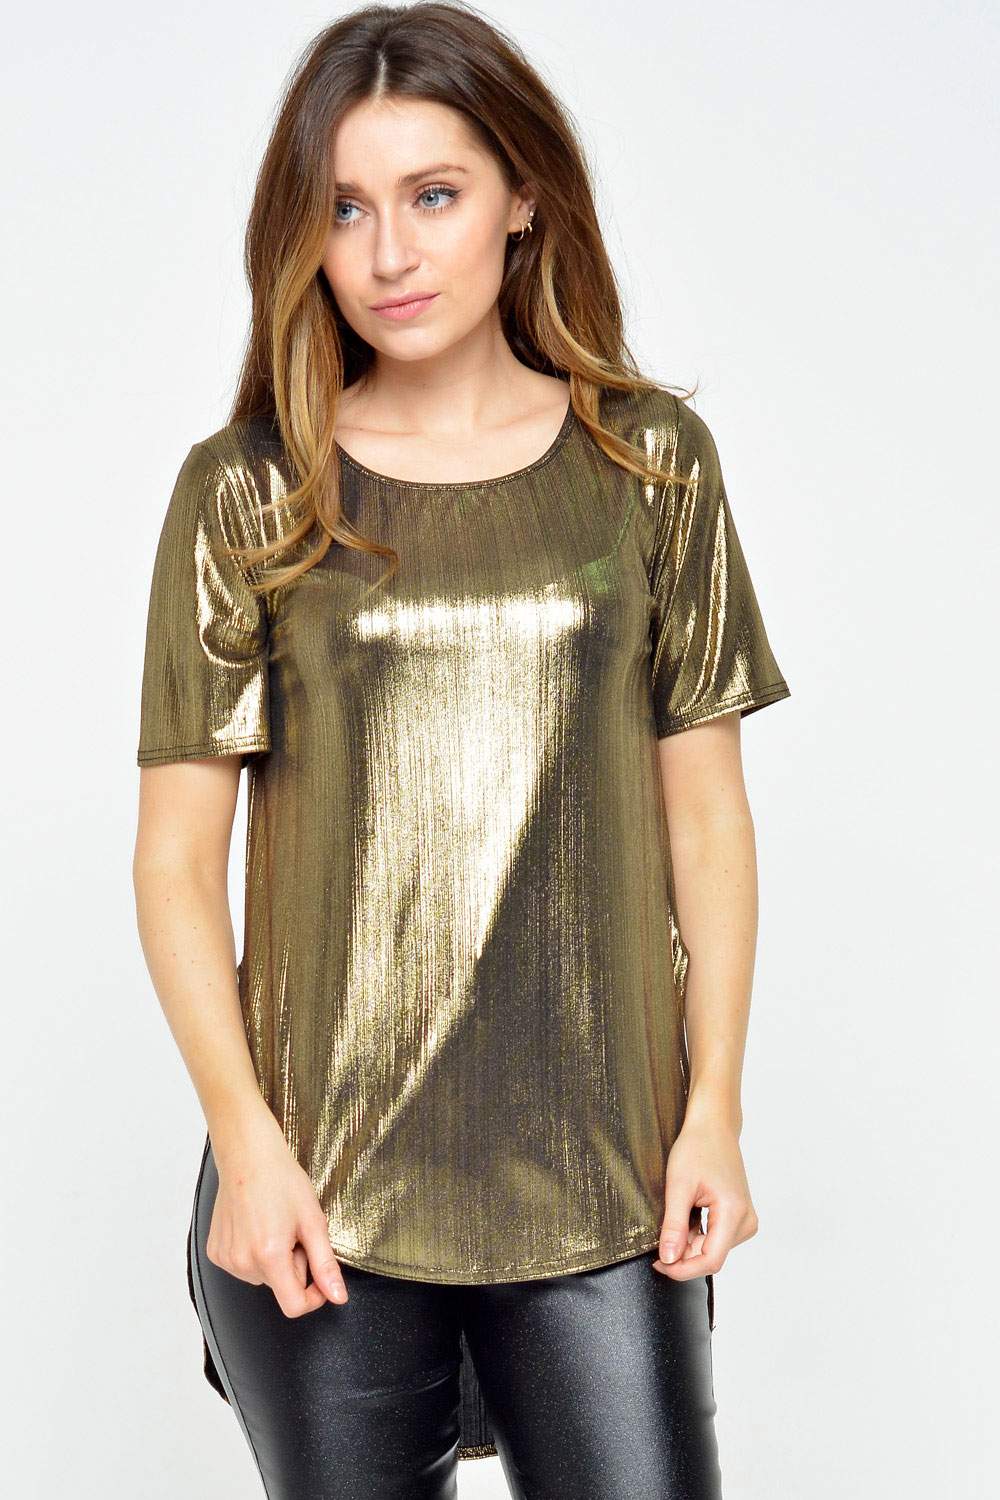 Passion Cami Metallic Top in Gold | iCLOTHING - iCLOTHING